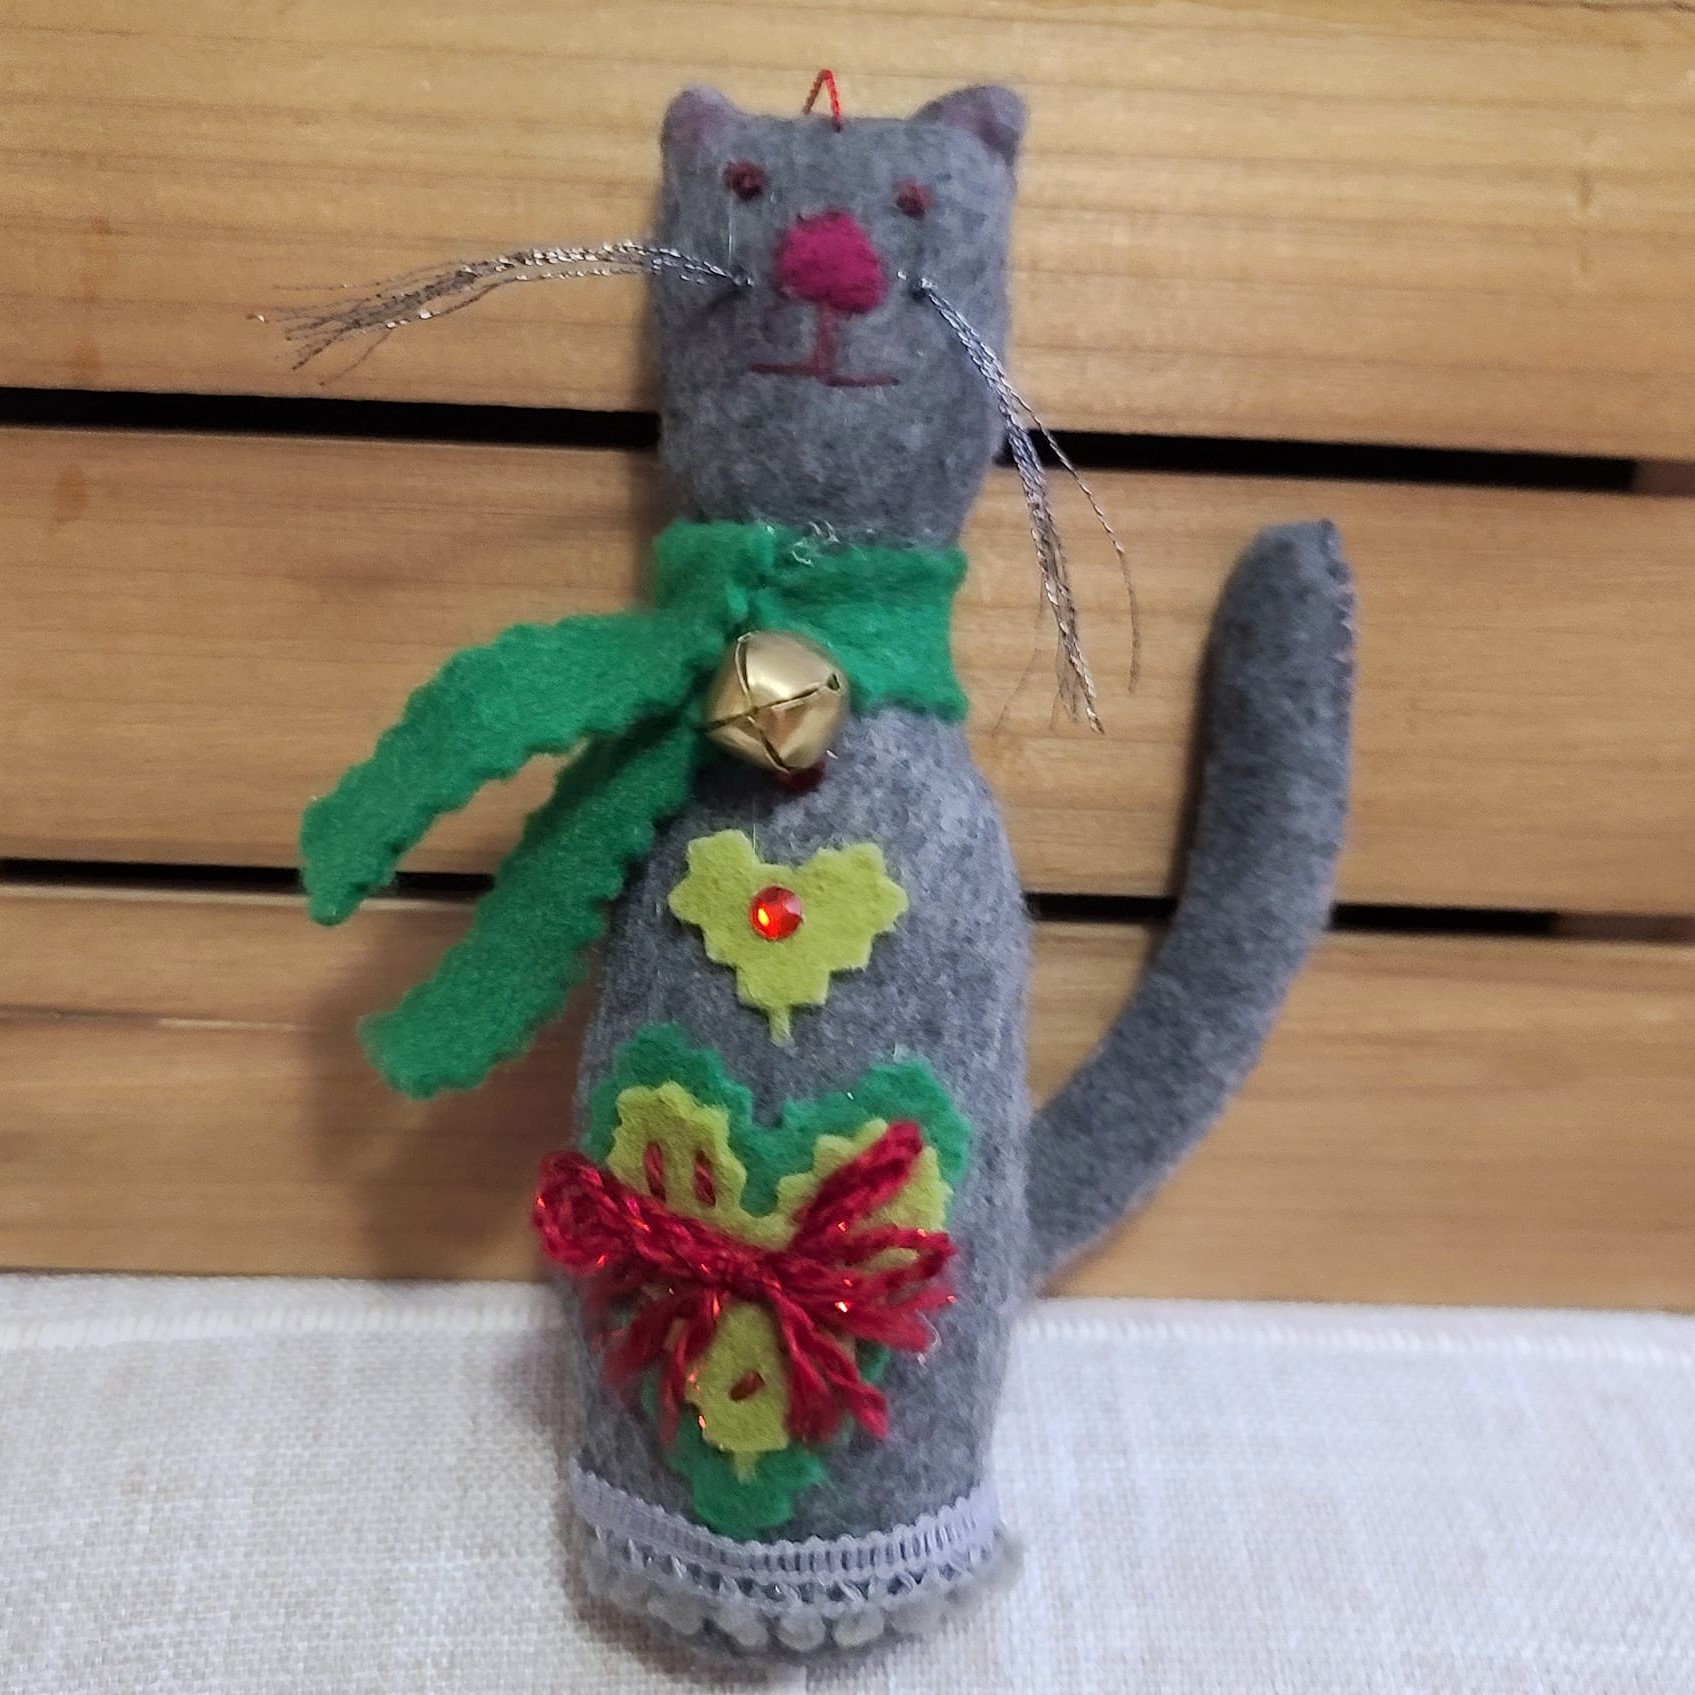 Cat felt ornament - dark gray with red and green accents